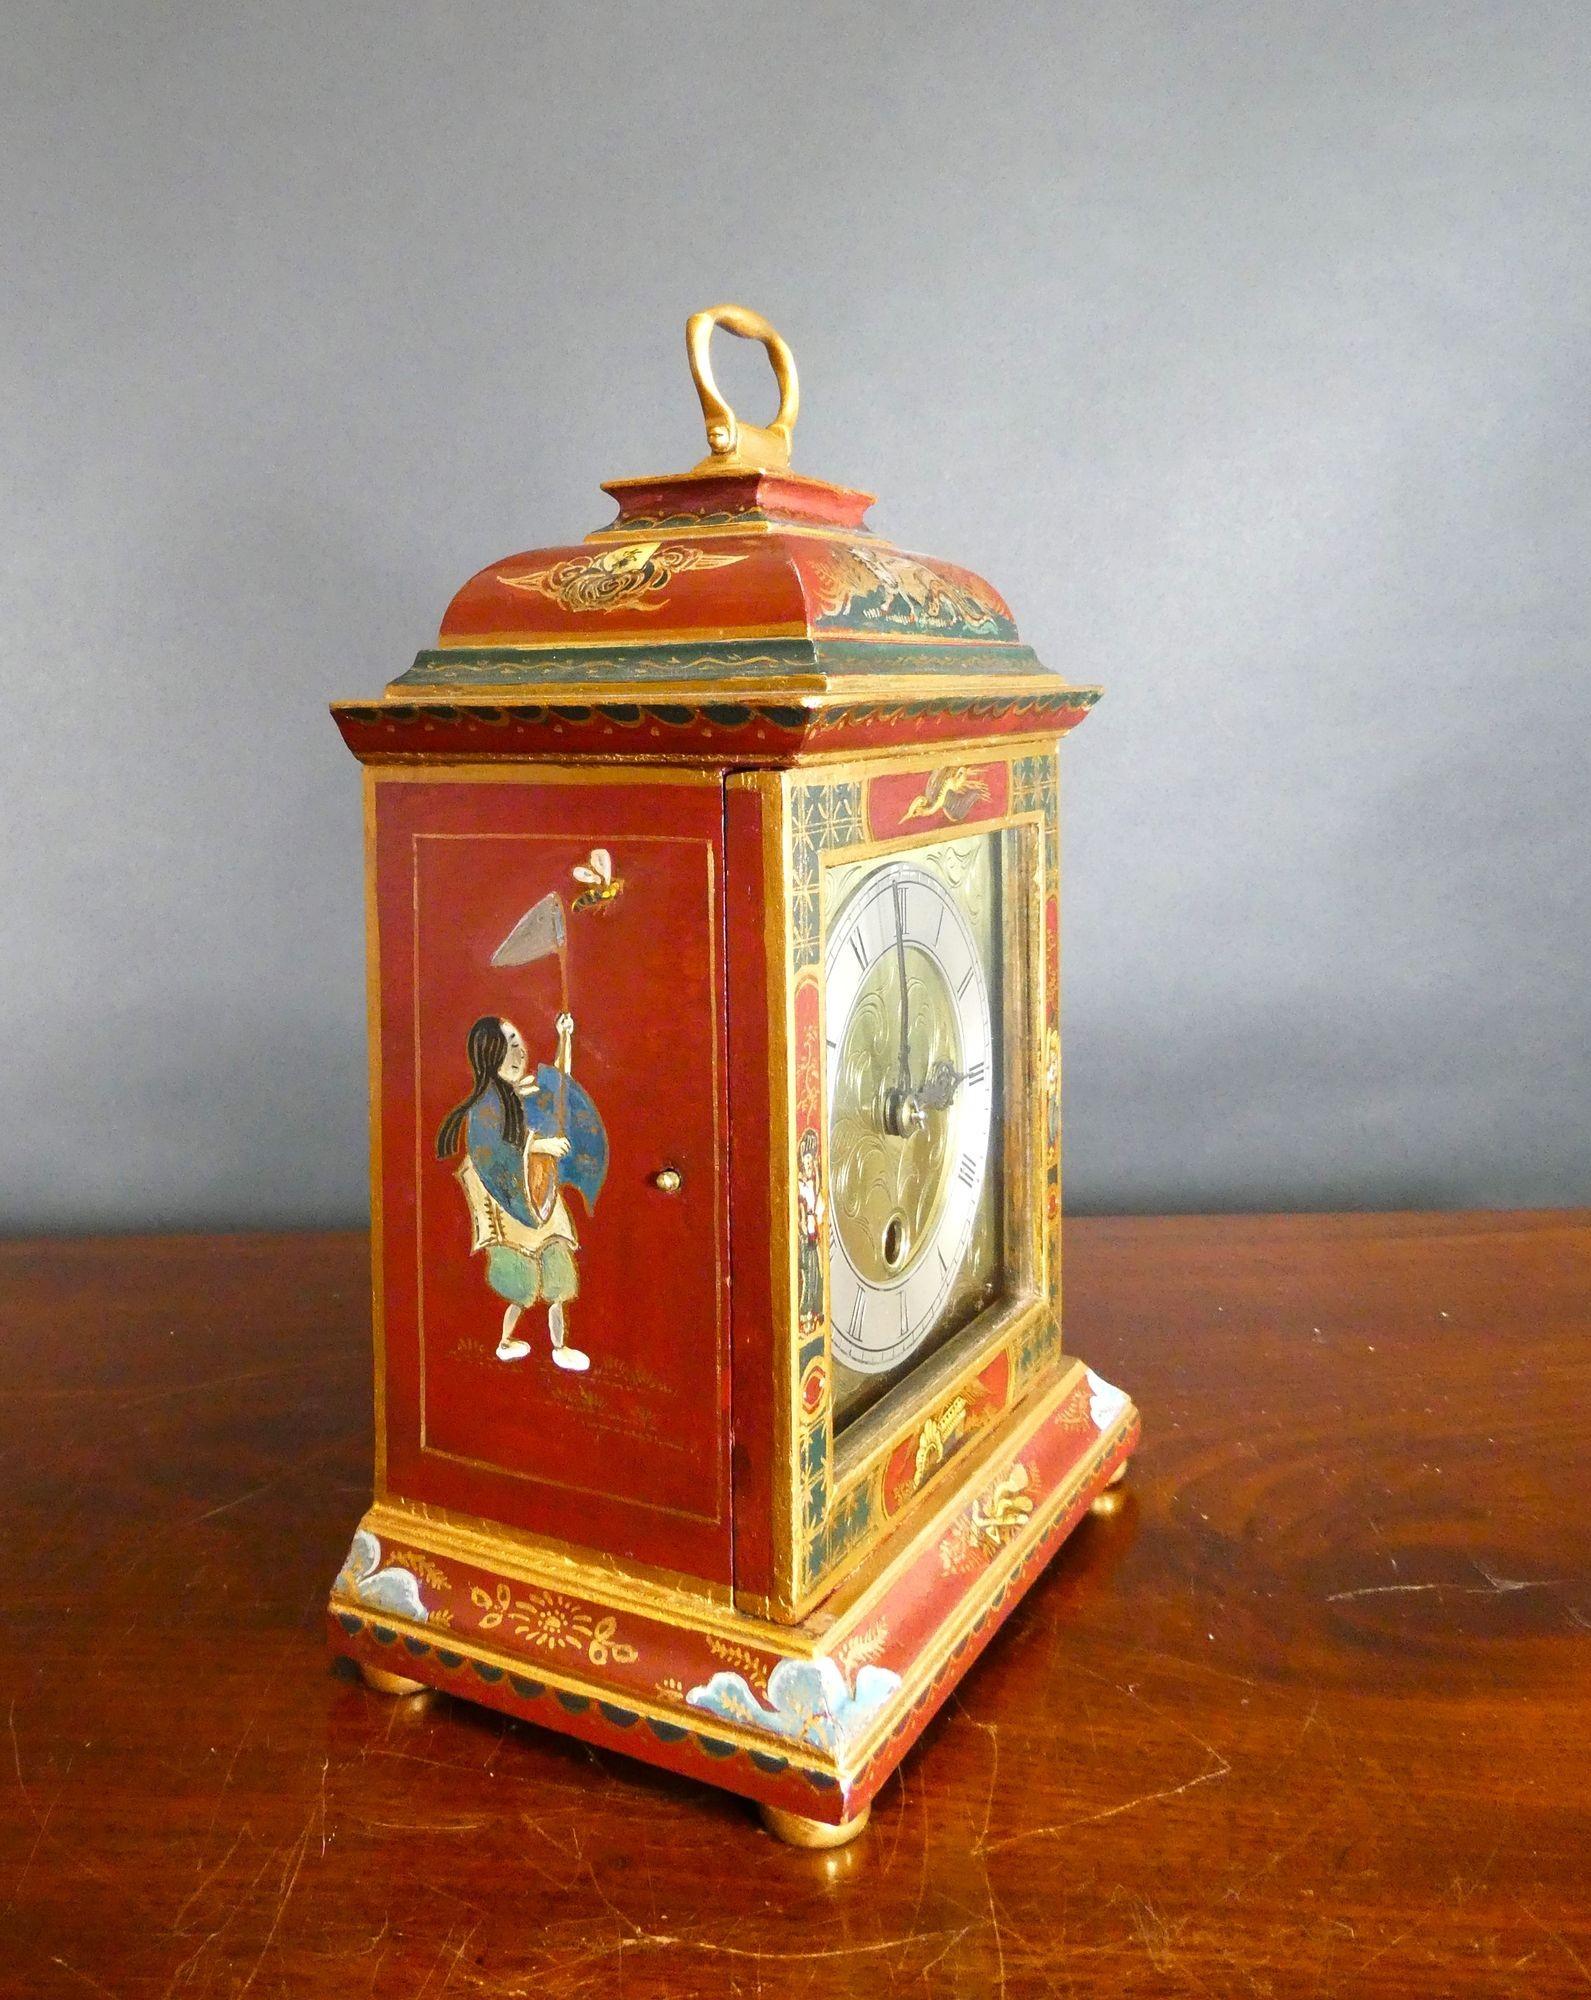 EDWARDIAN MANTEL CLOCK

Edwardian mantel clock housed in a chinoiserie decorated case with typical Chinese scenes on a red ground, standing on a raised plinth and resting on brass bun feet, surmounted by a bell top with brass carrying